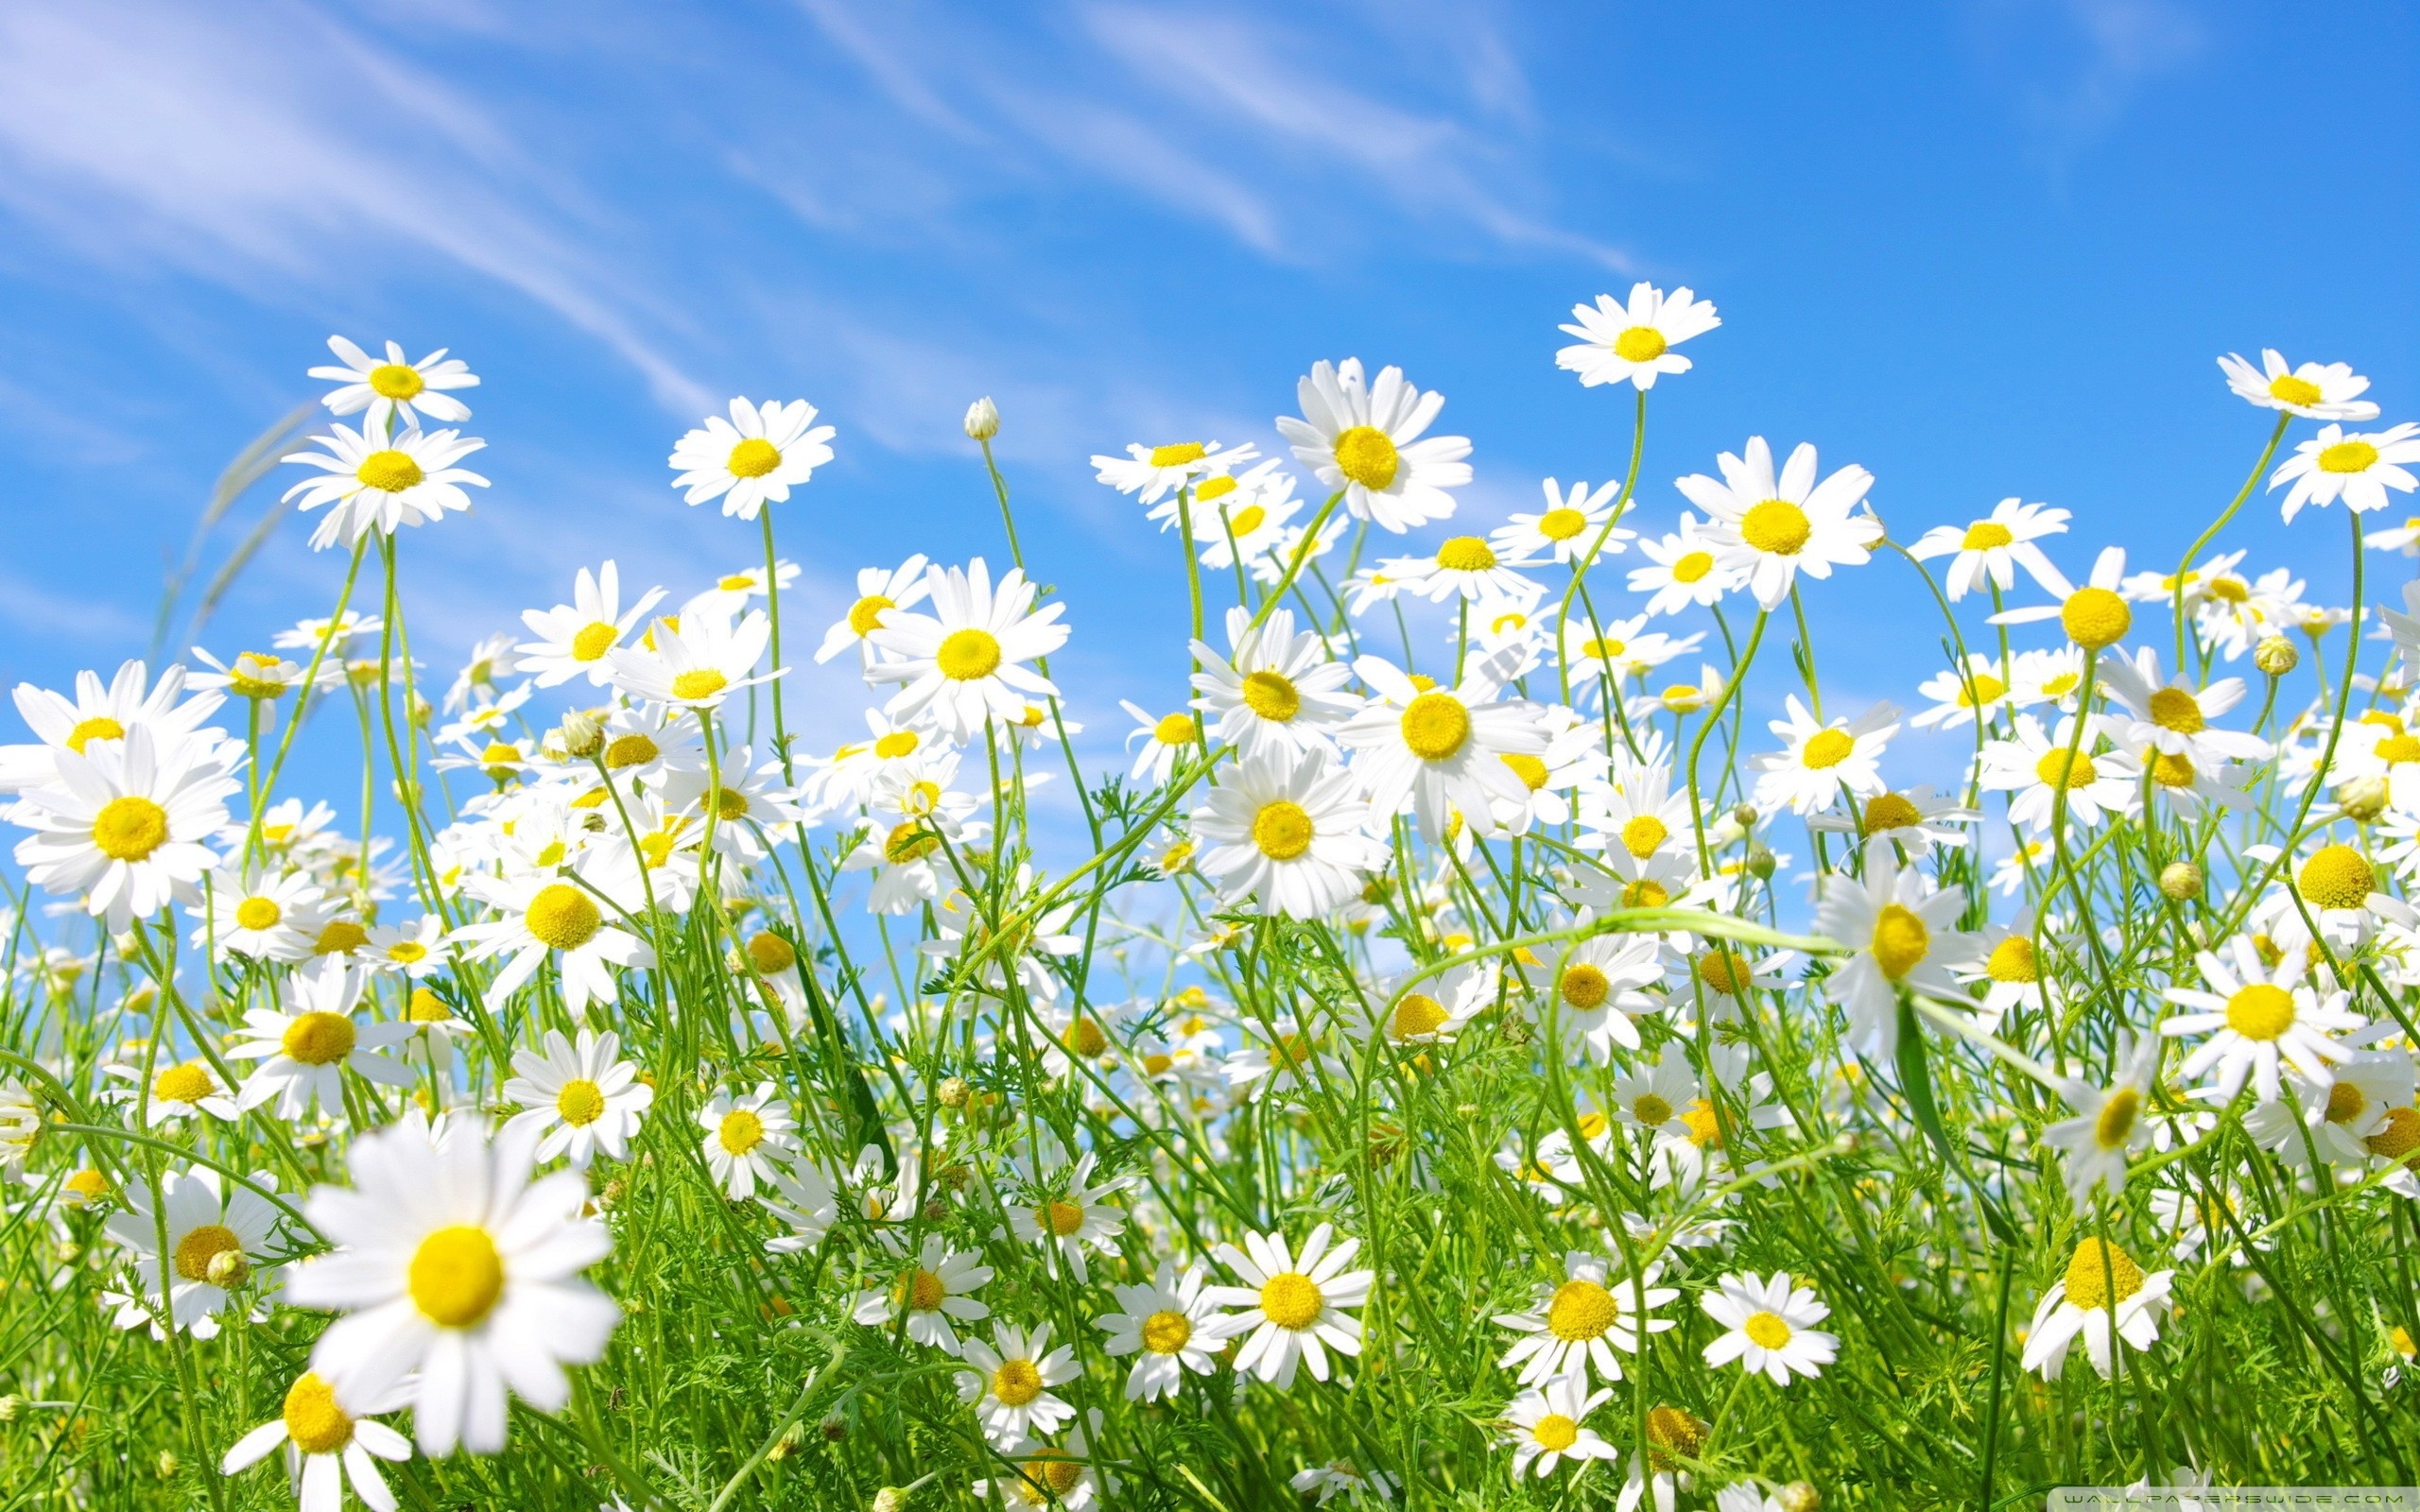 Field Of Daisies Wallpapers Group (62+)